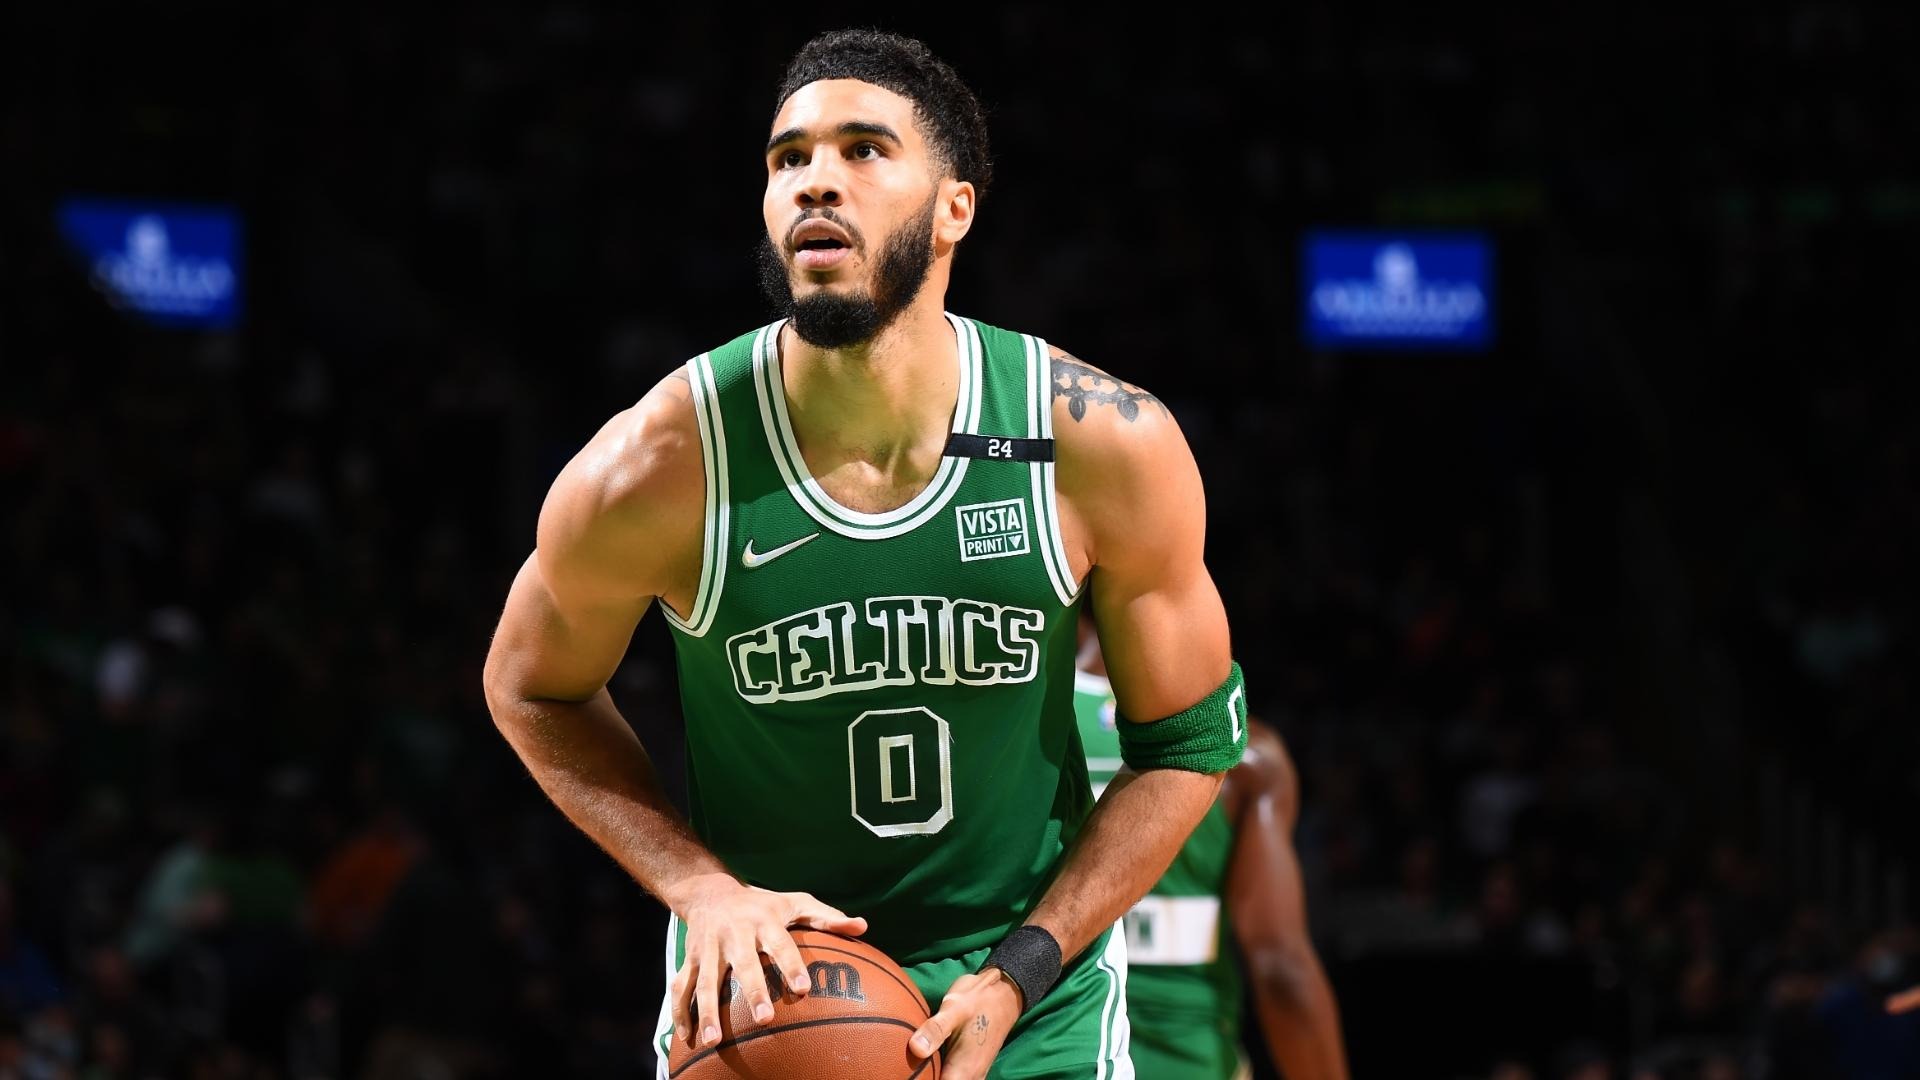 The Top 5 Draft Picks in Recent History of the Boston Celtics